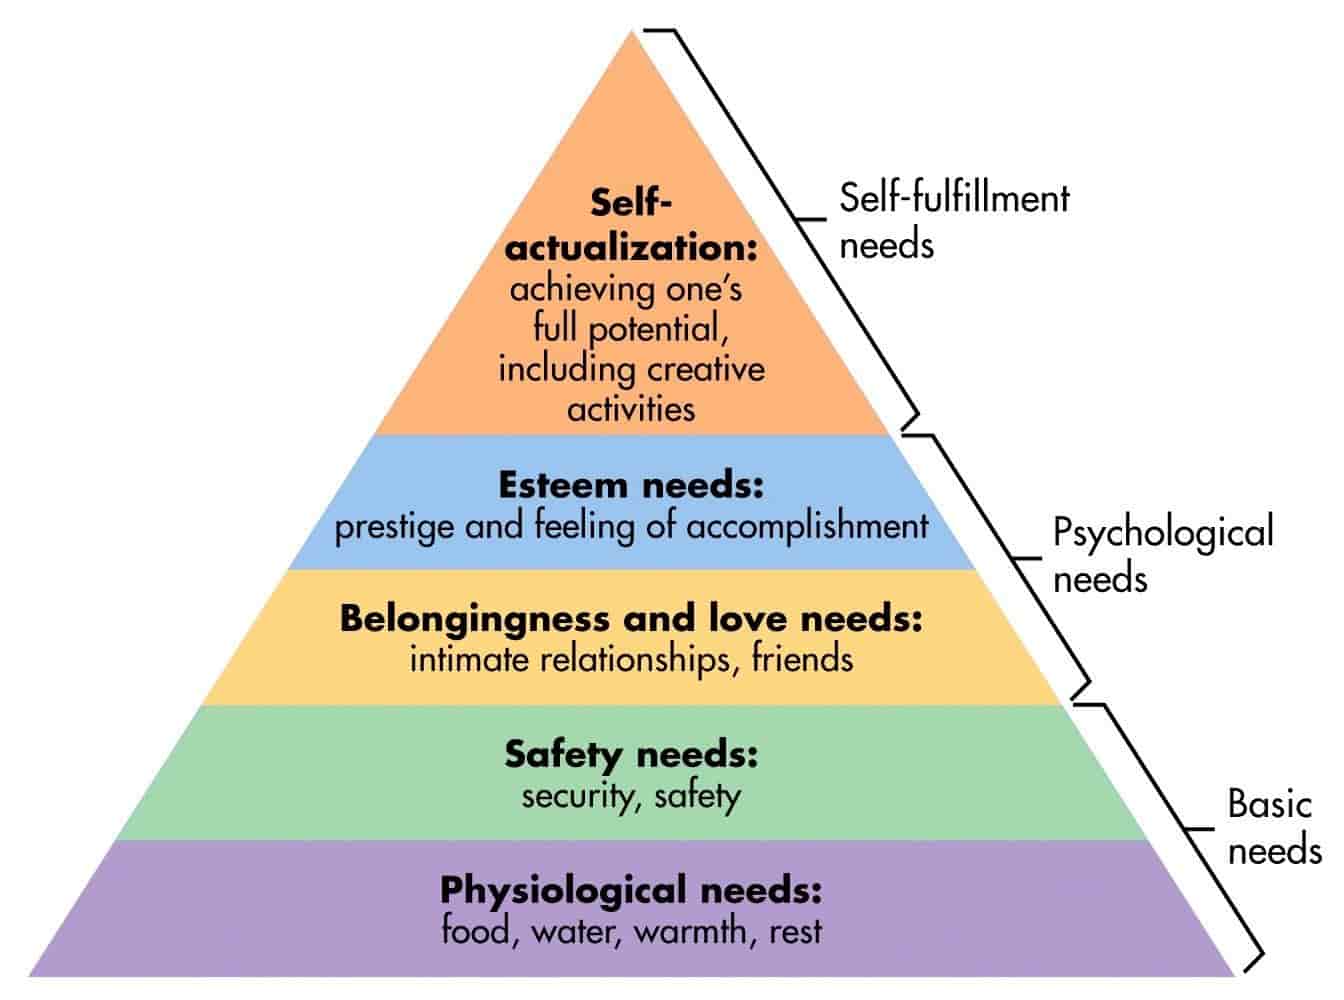 Maslows' Hierarchy of Needs